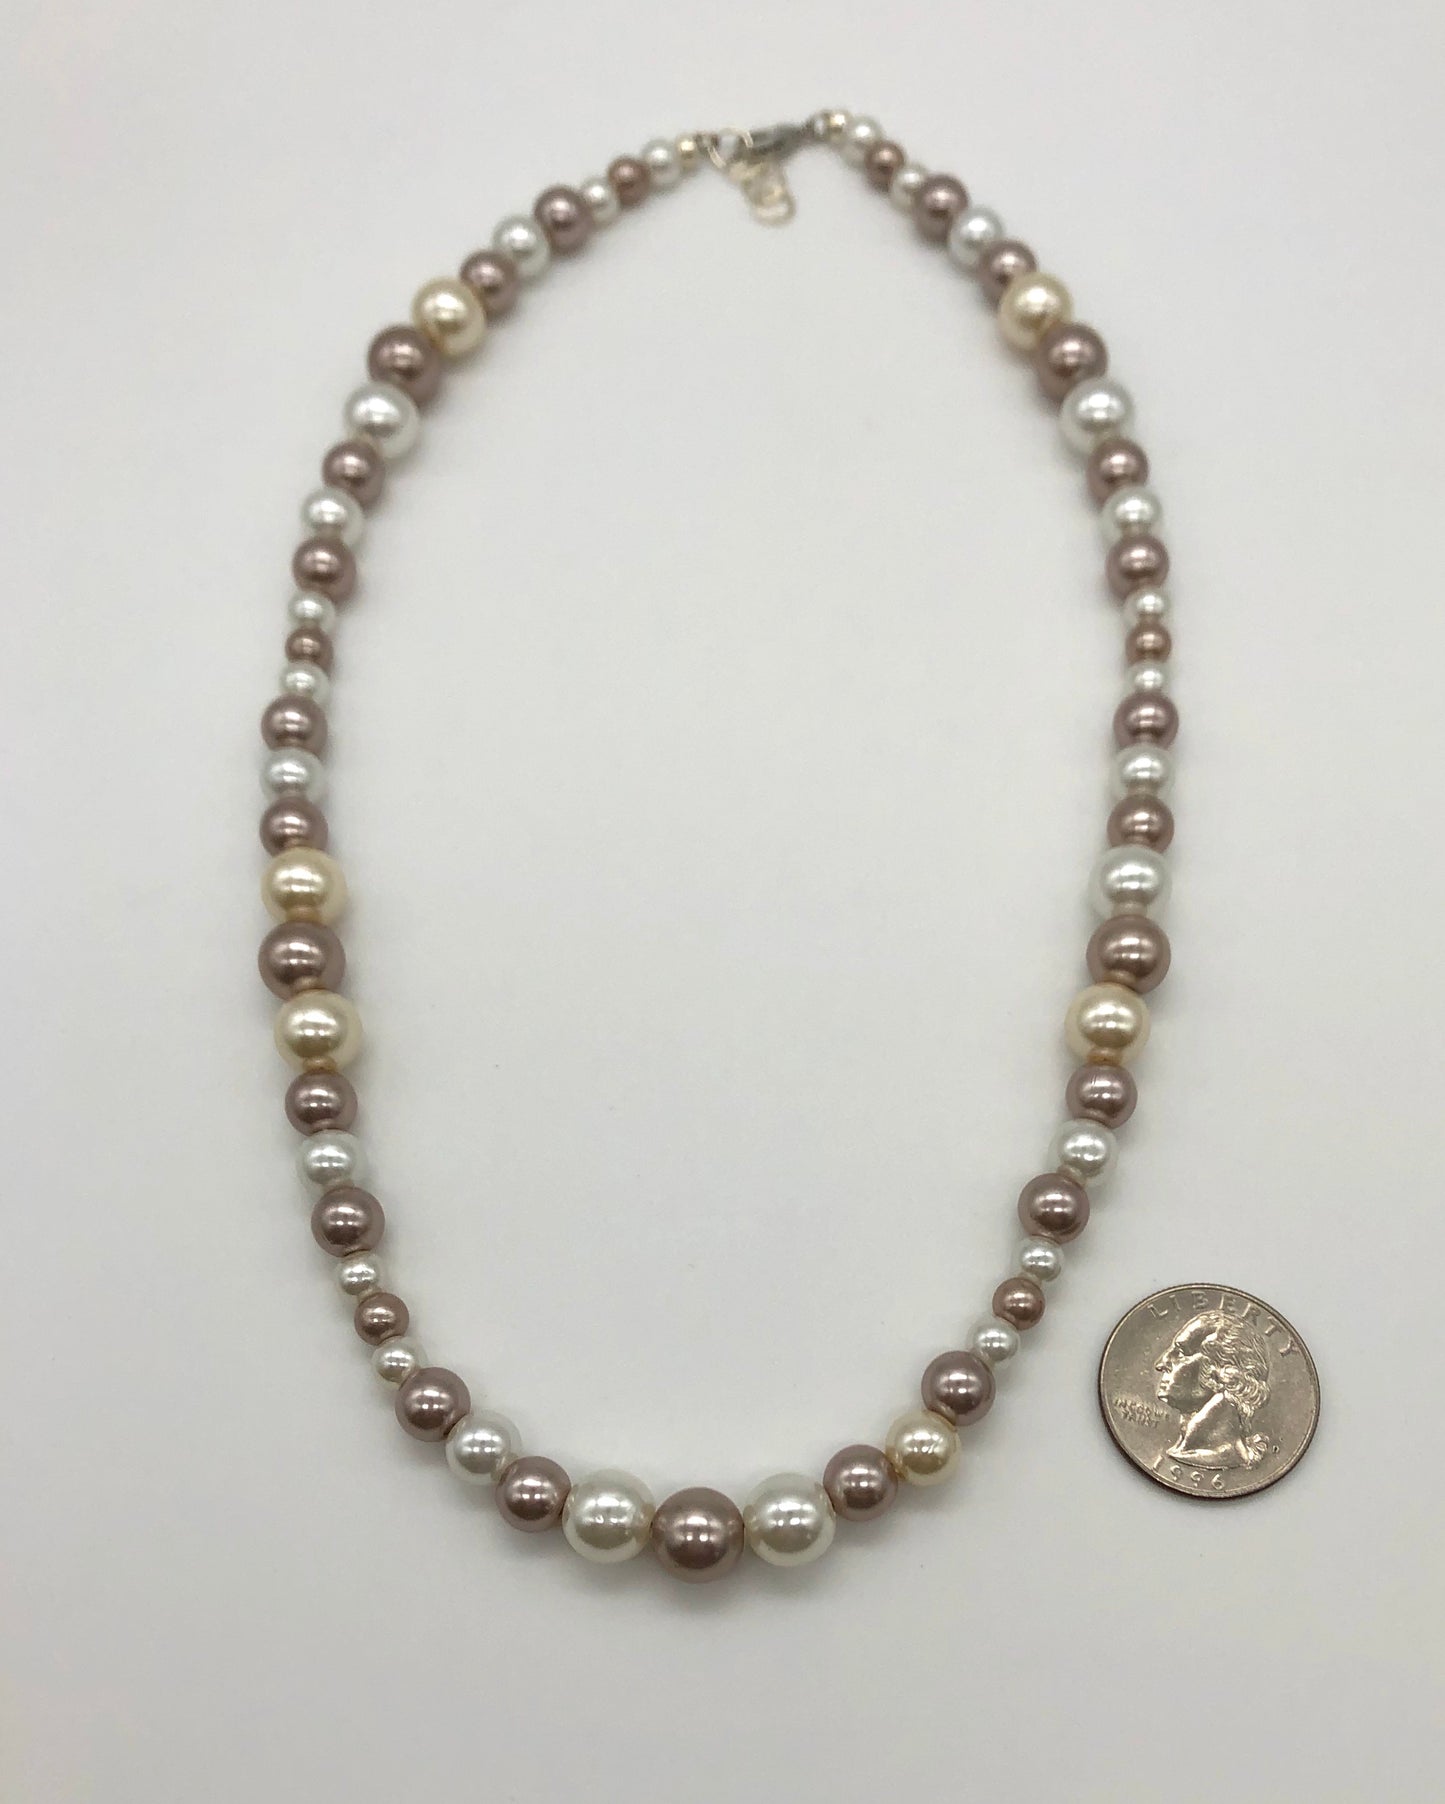 Faux cream and champagne pearl bead necklace